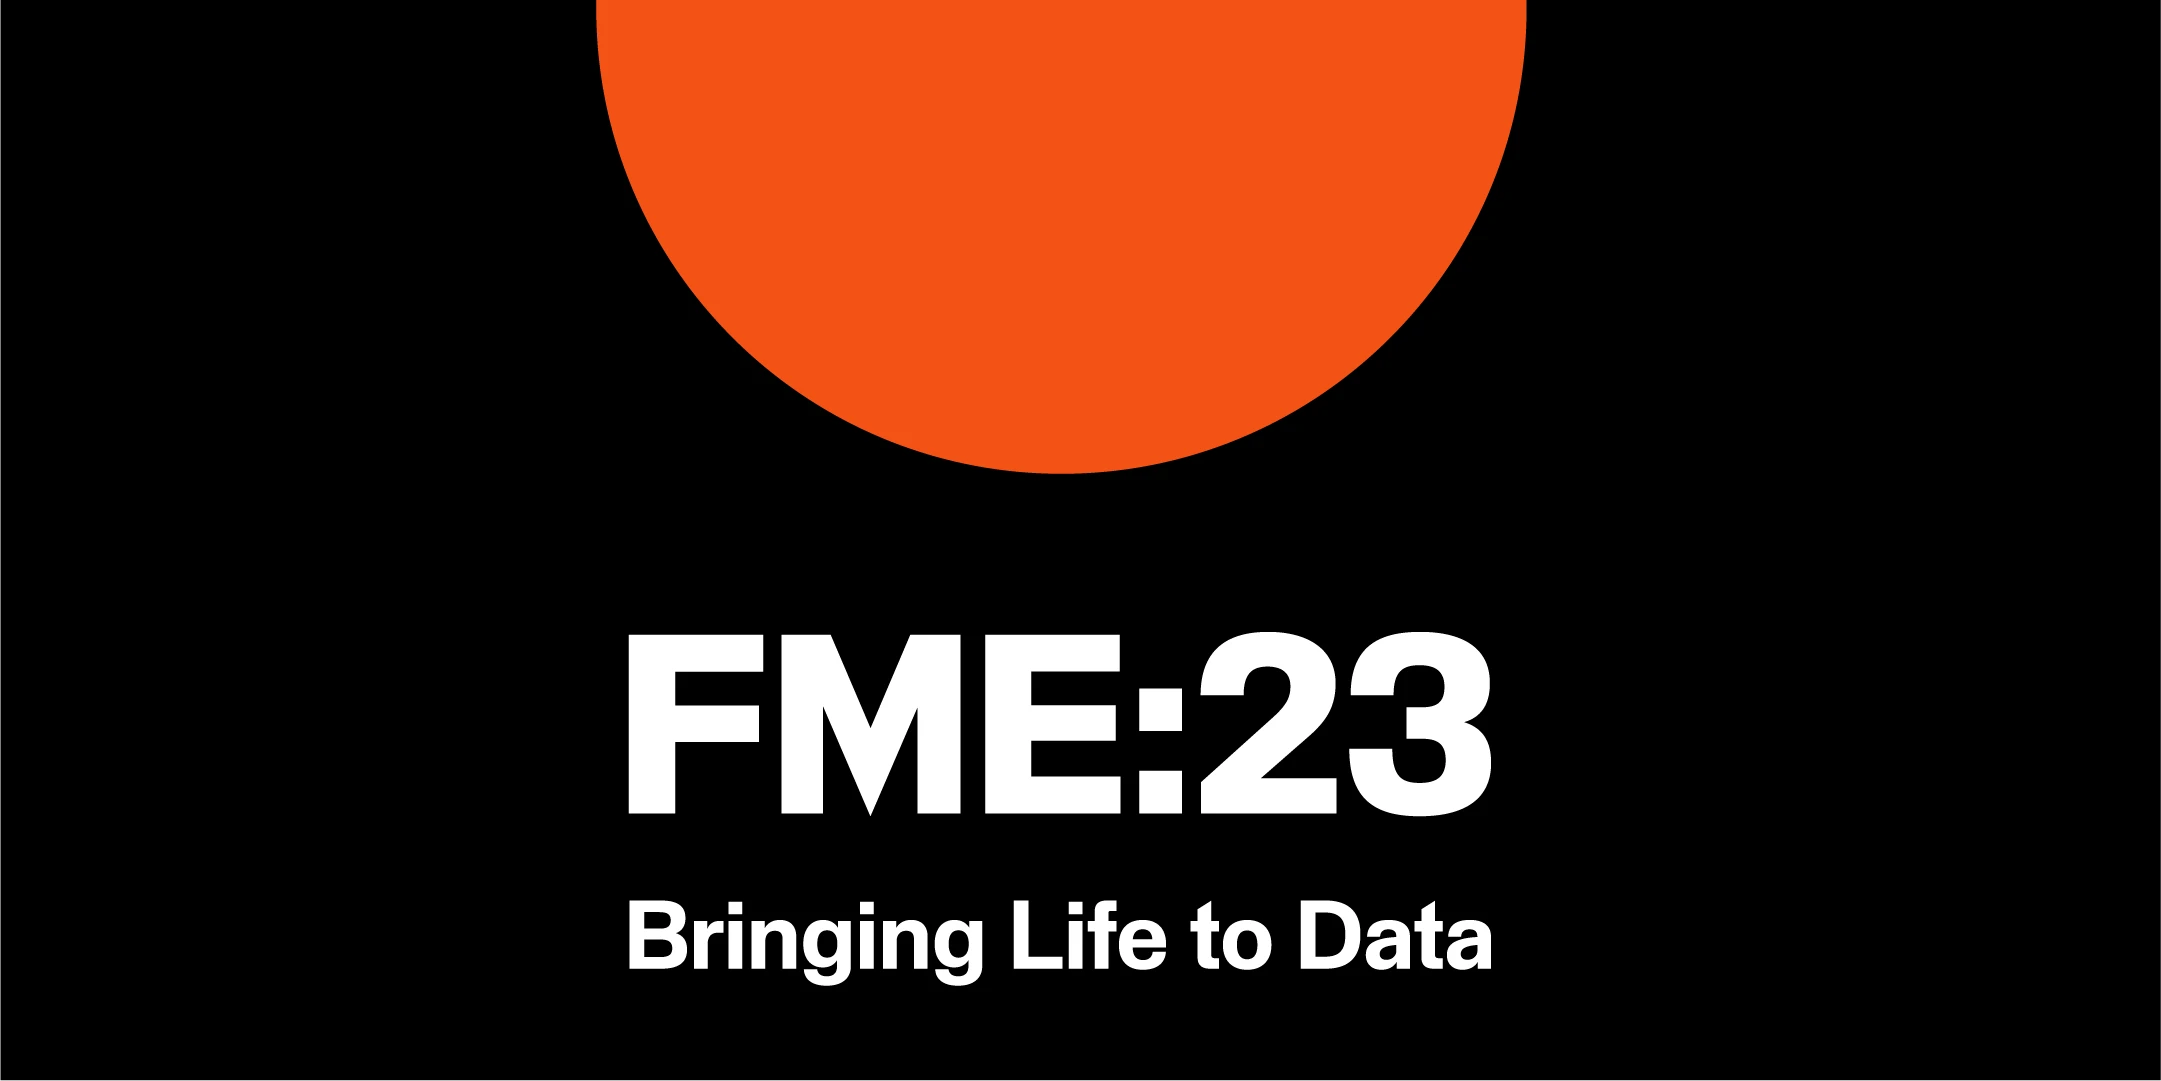 FME:23 